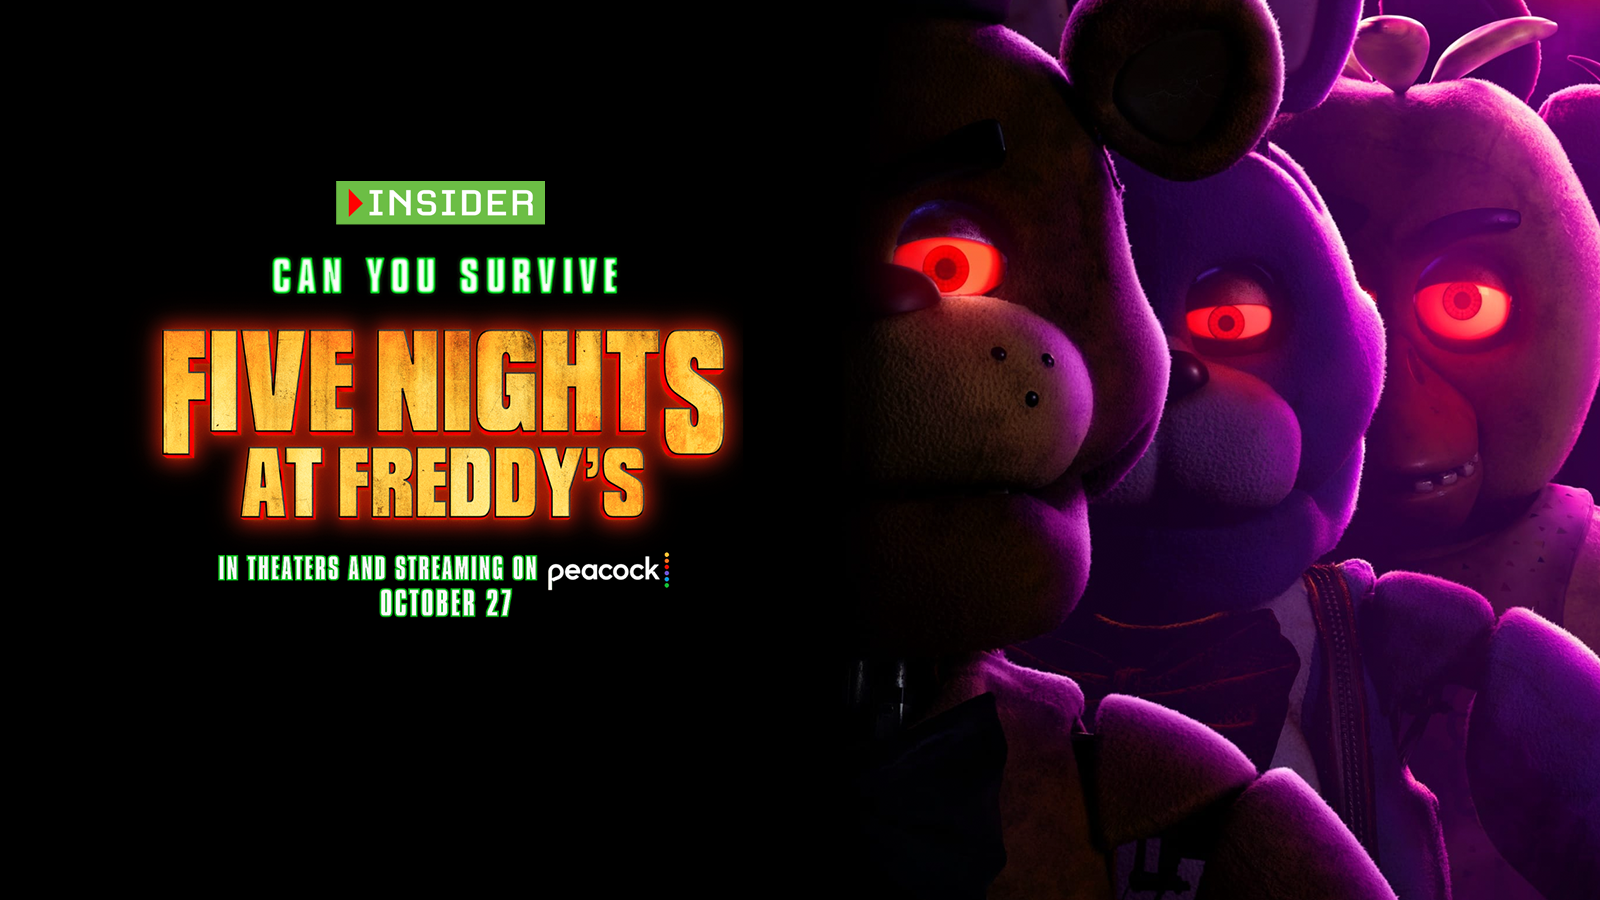 Five Nights At Freddy's 2 – FULL TRAILER (2024) Universal Pictures 